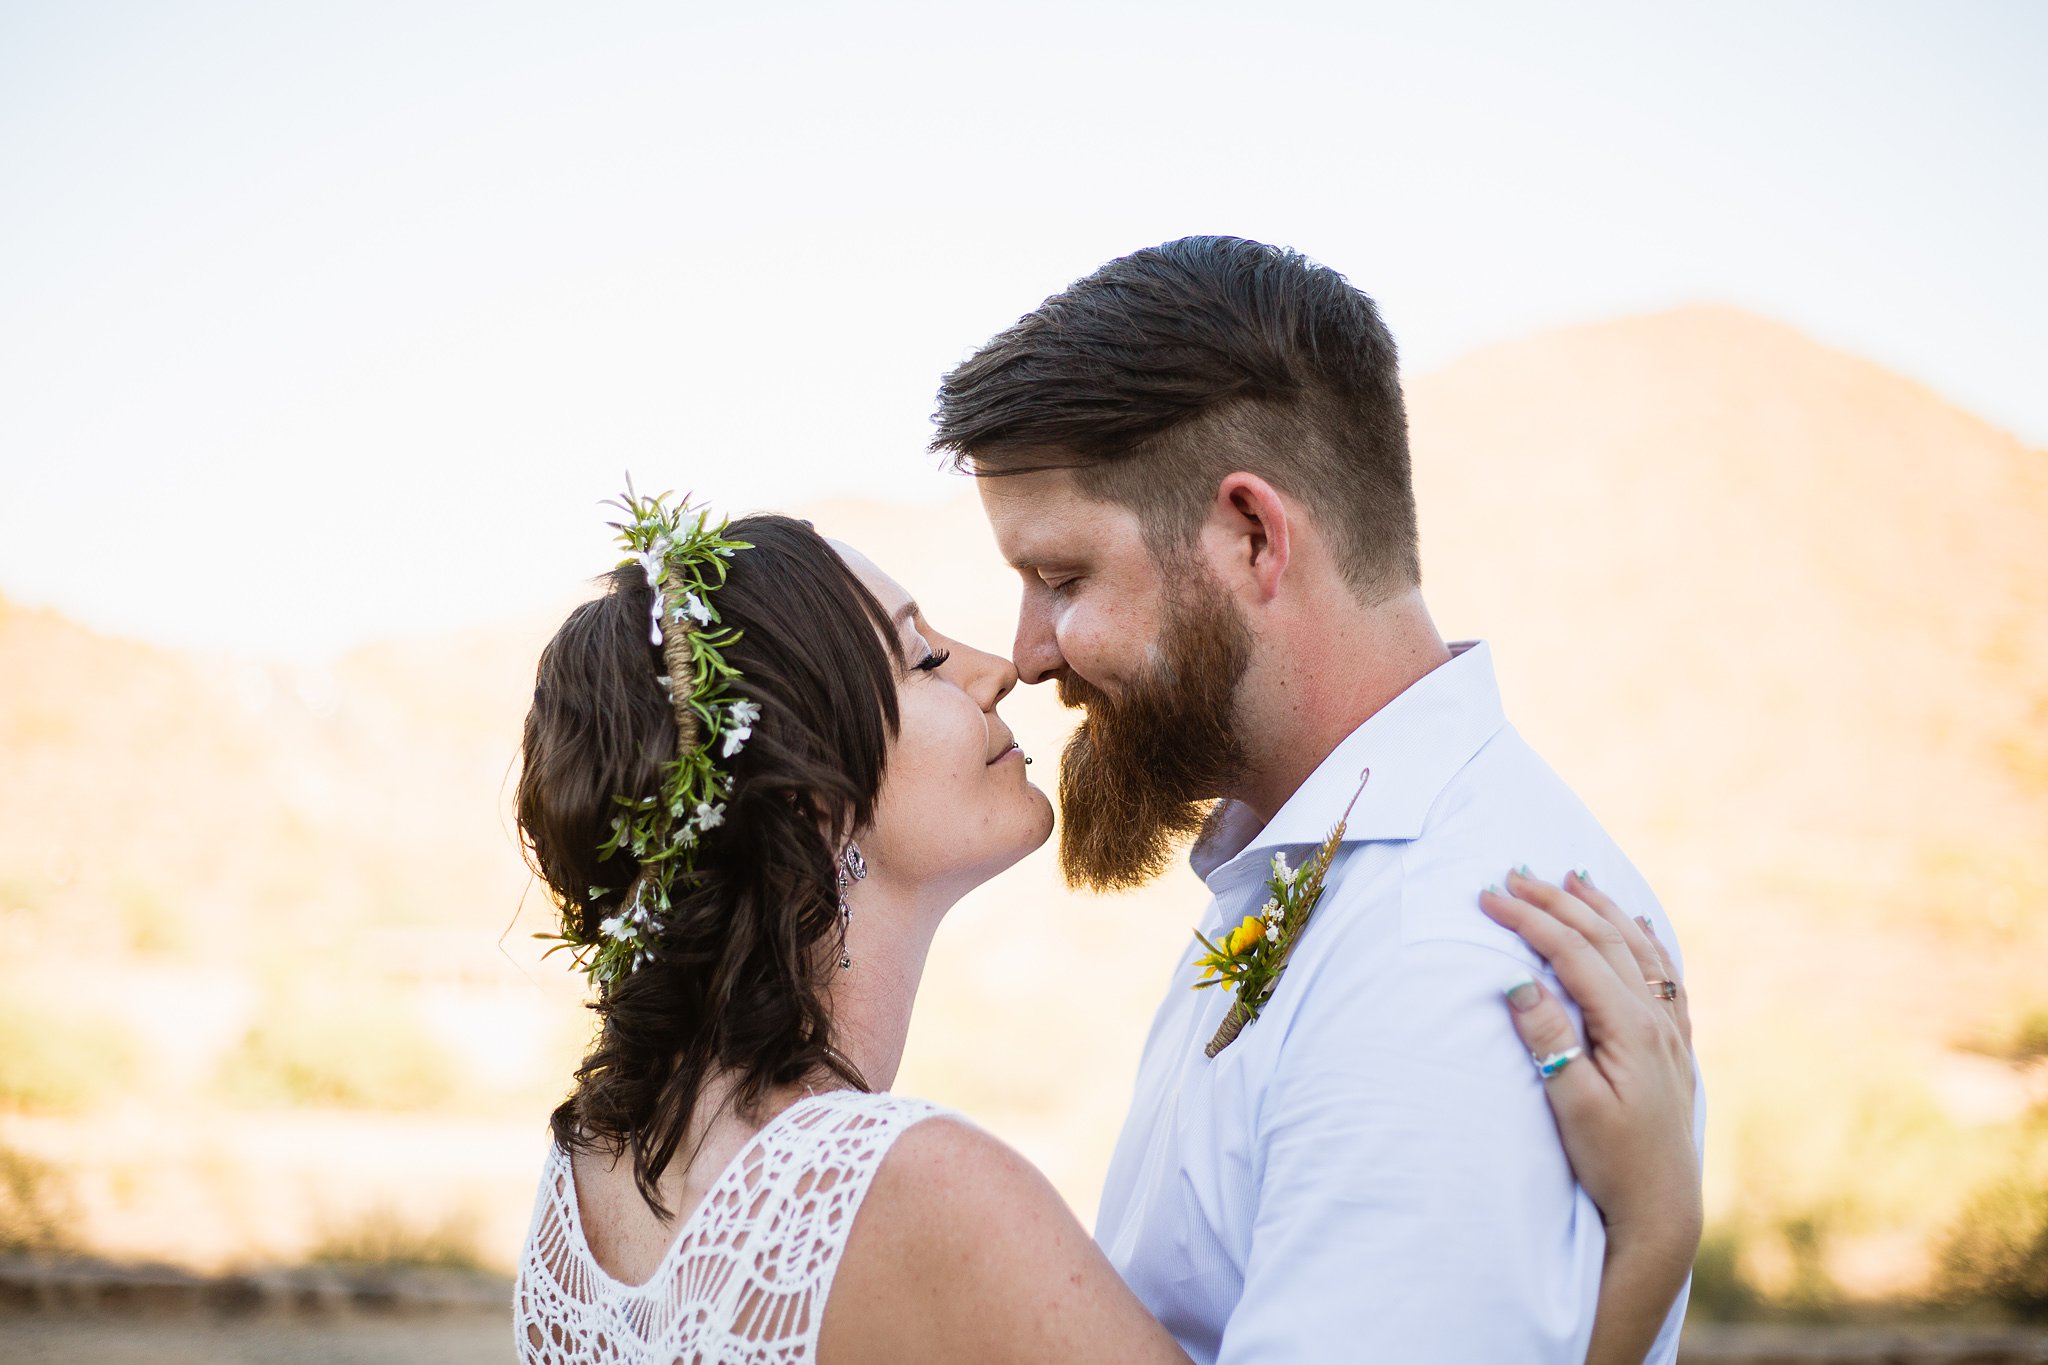 Bride and groom share a romantic moment by Phoenix wedding photographer PMA Photography.